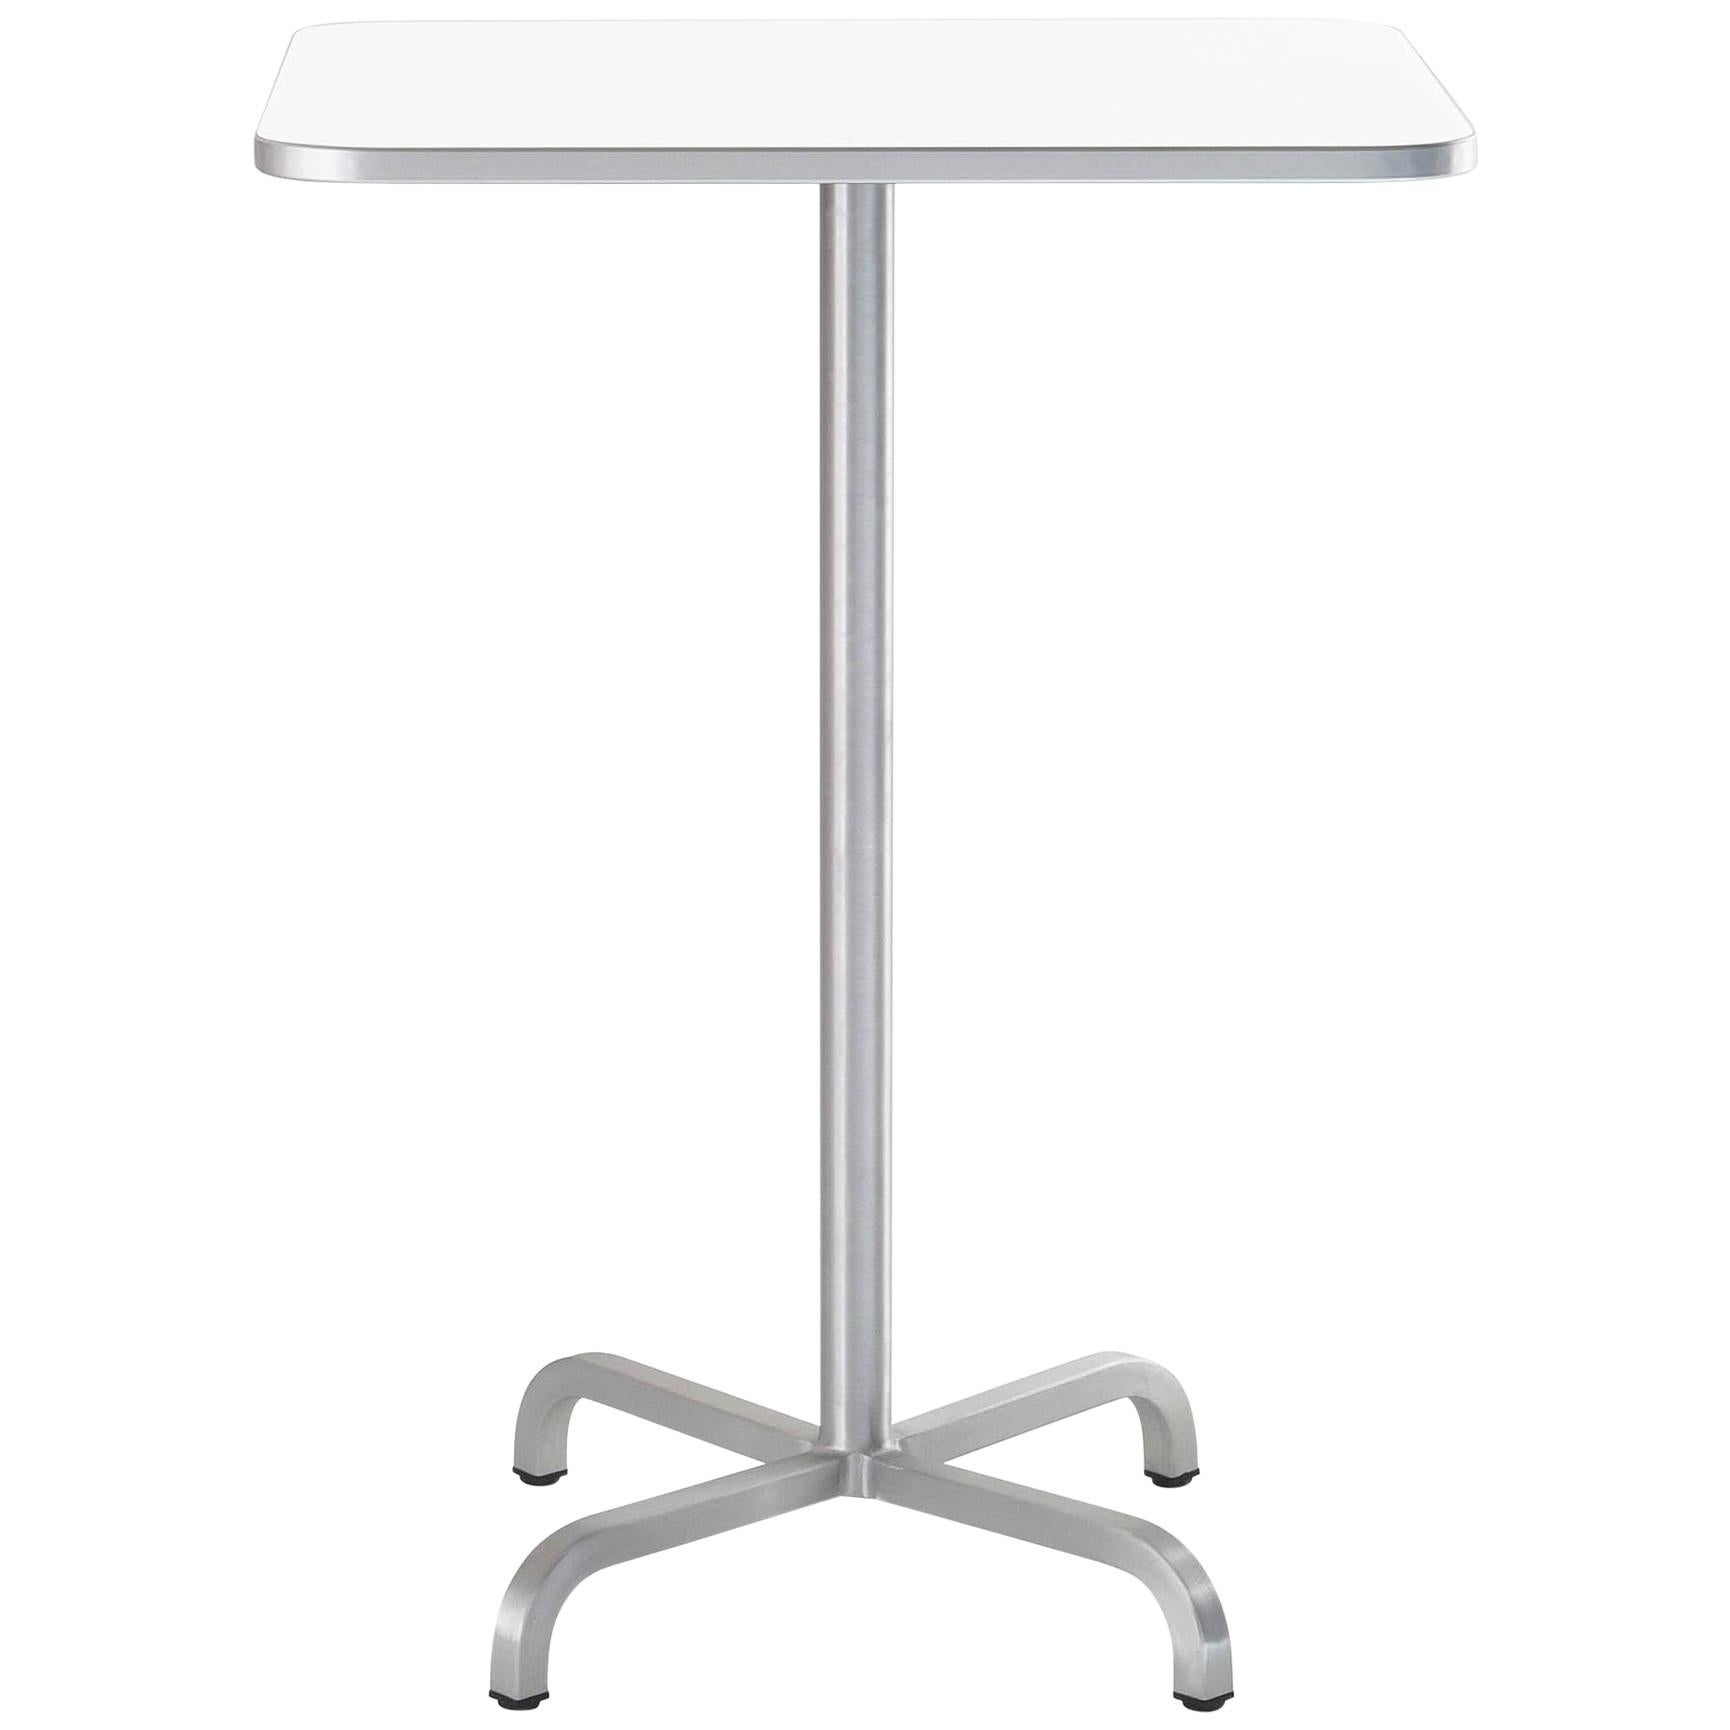 Emeco 20-06 Large Square Bar Table w/ White Laminate Top by Norman Foster 